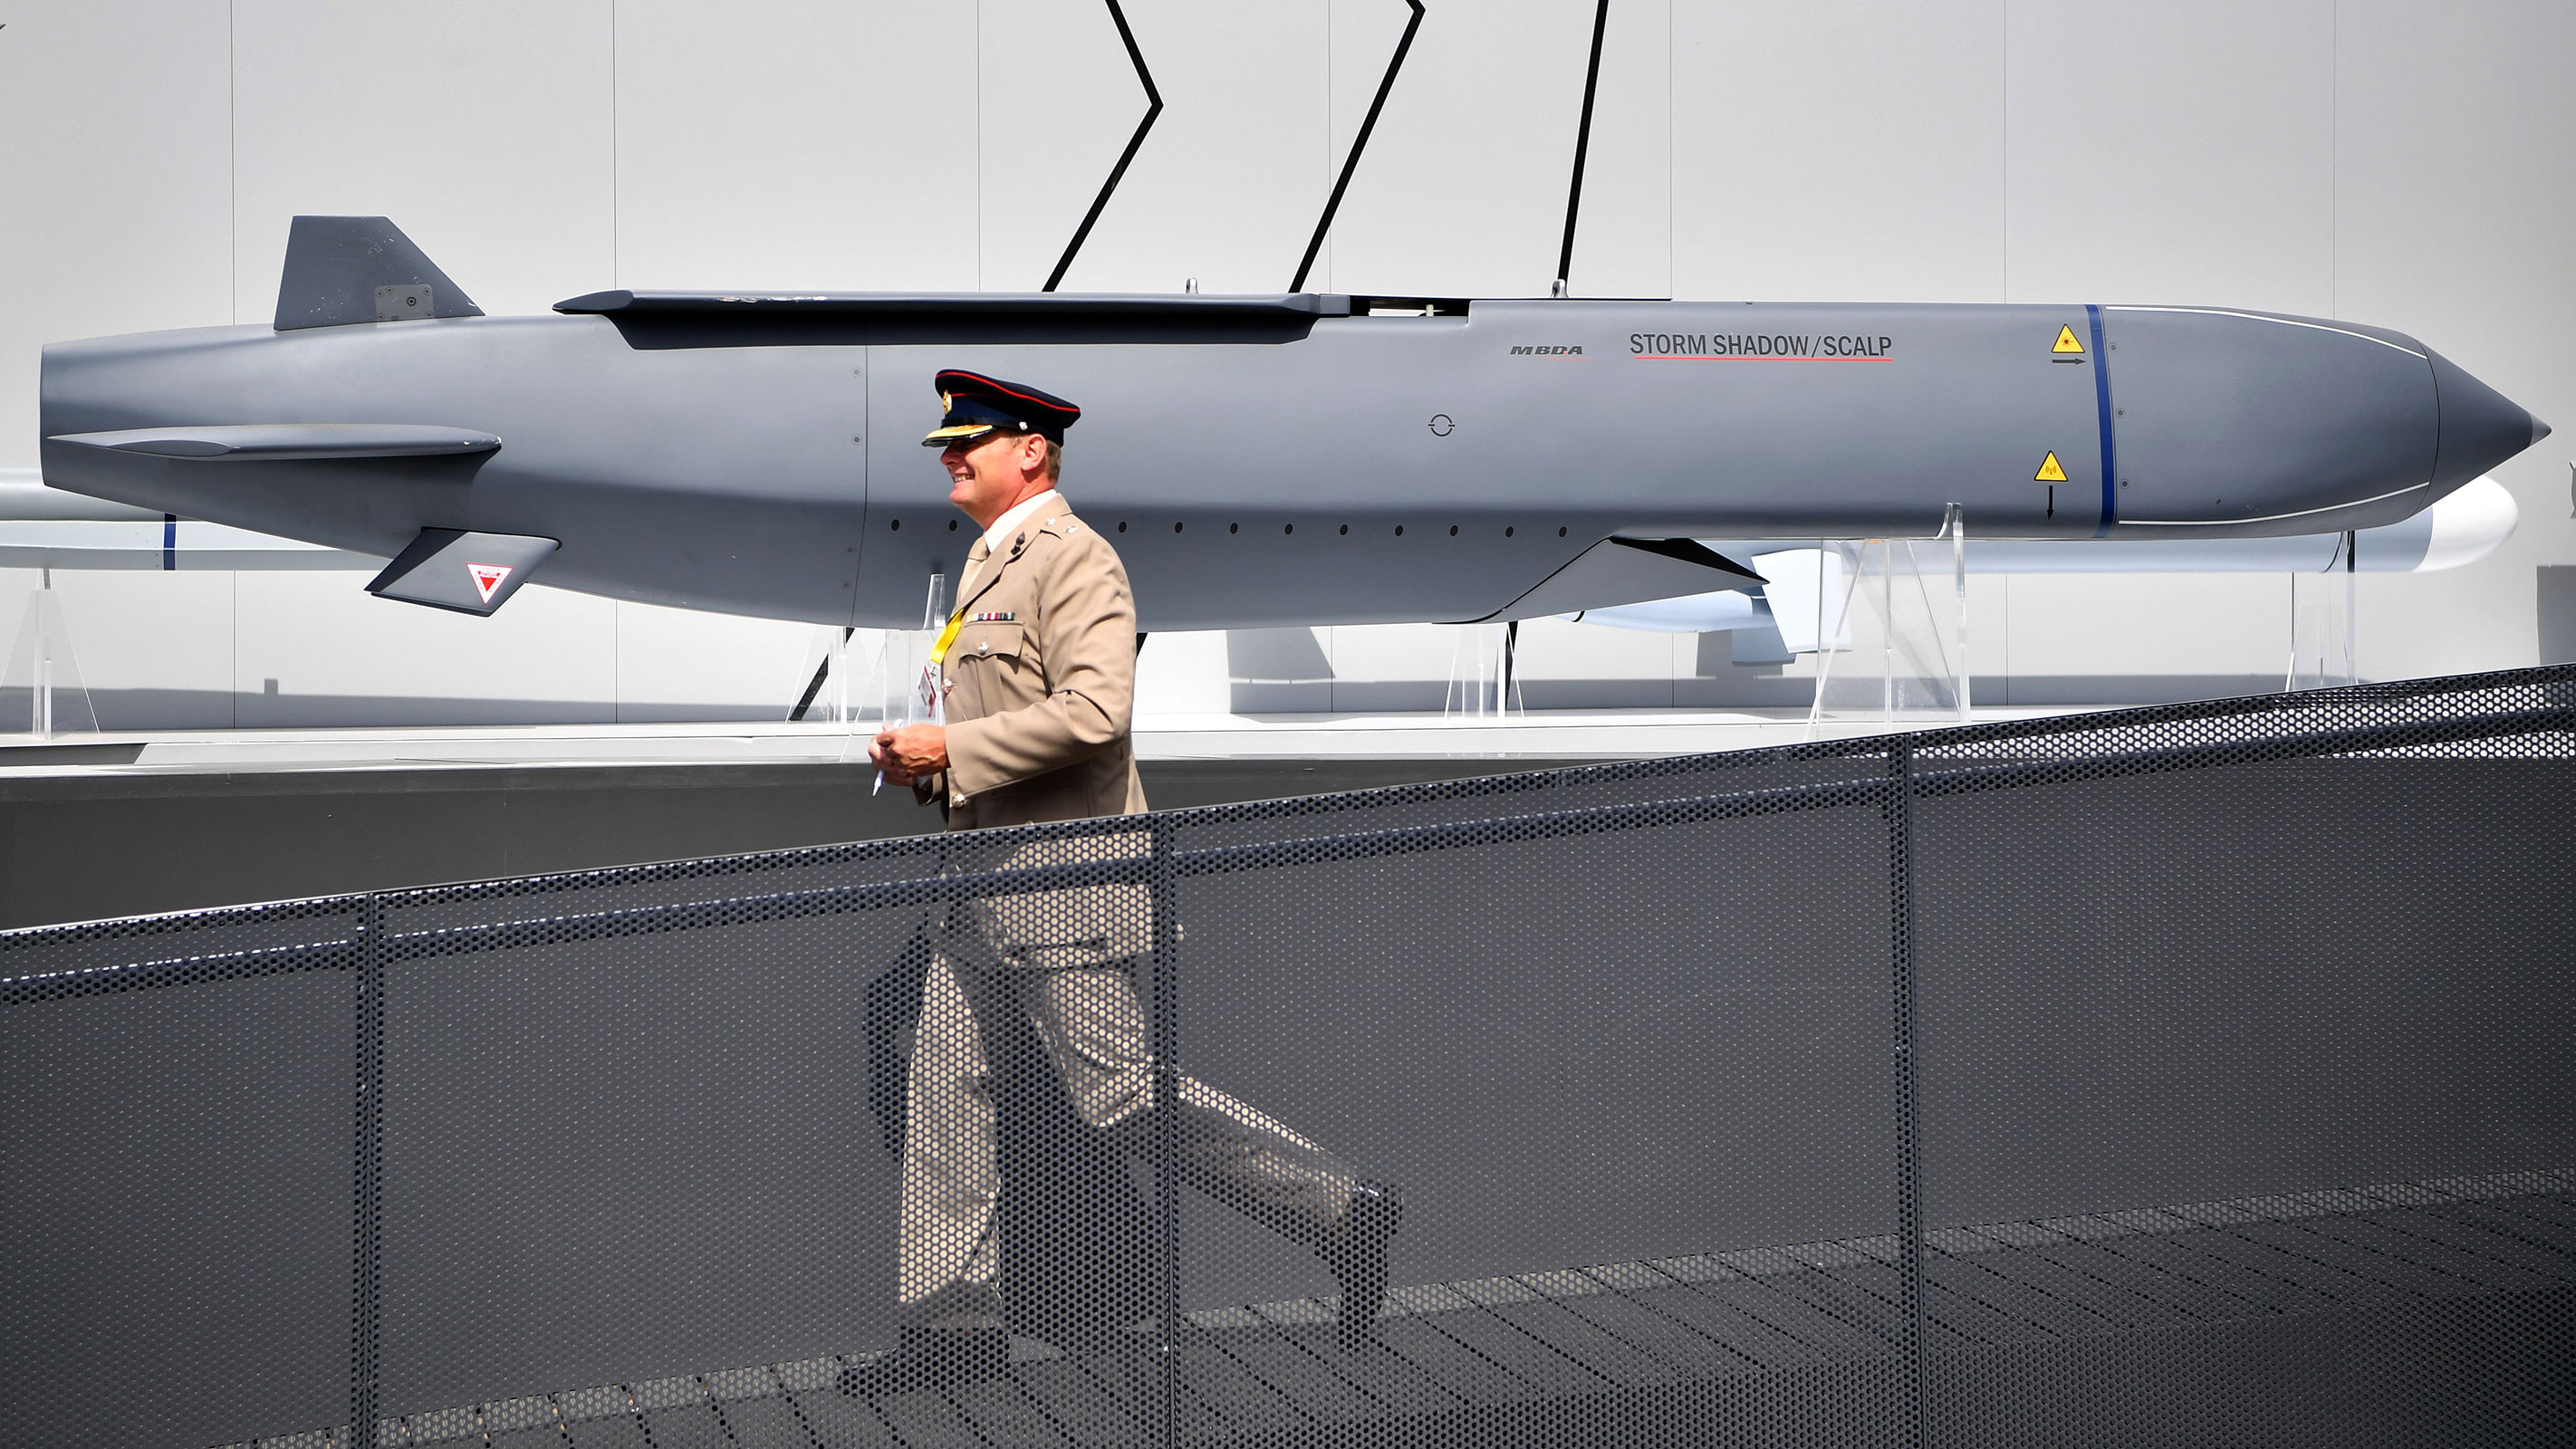 In this 2018 photo, a member of the military walks past a MBDA Storm Shadow/Scalp missile at the Farnborough Airshow southwest of London.